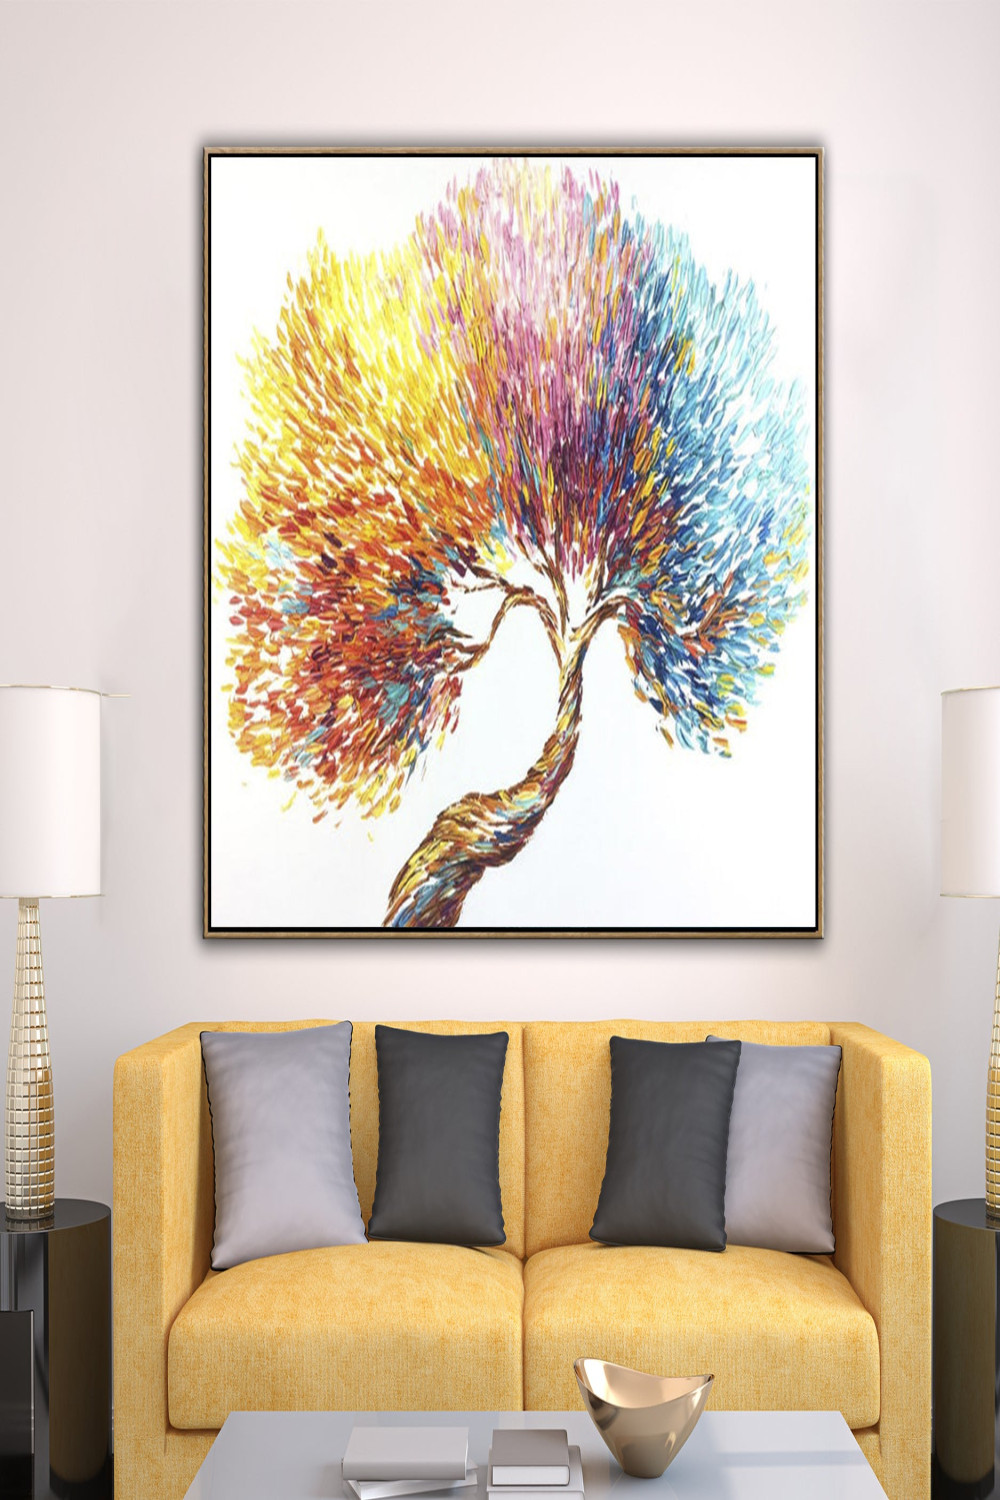 Ideas for a Living Room – Trend Gallery Art  Original Abstract